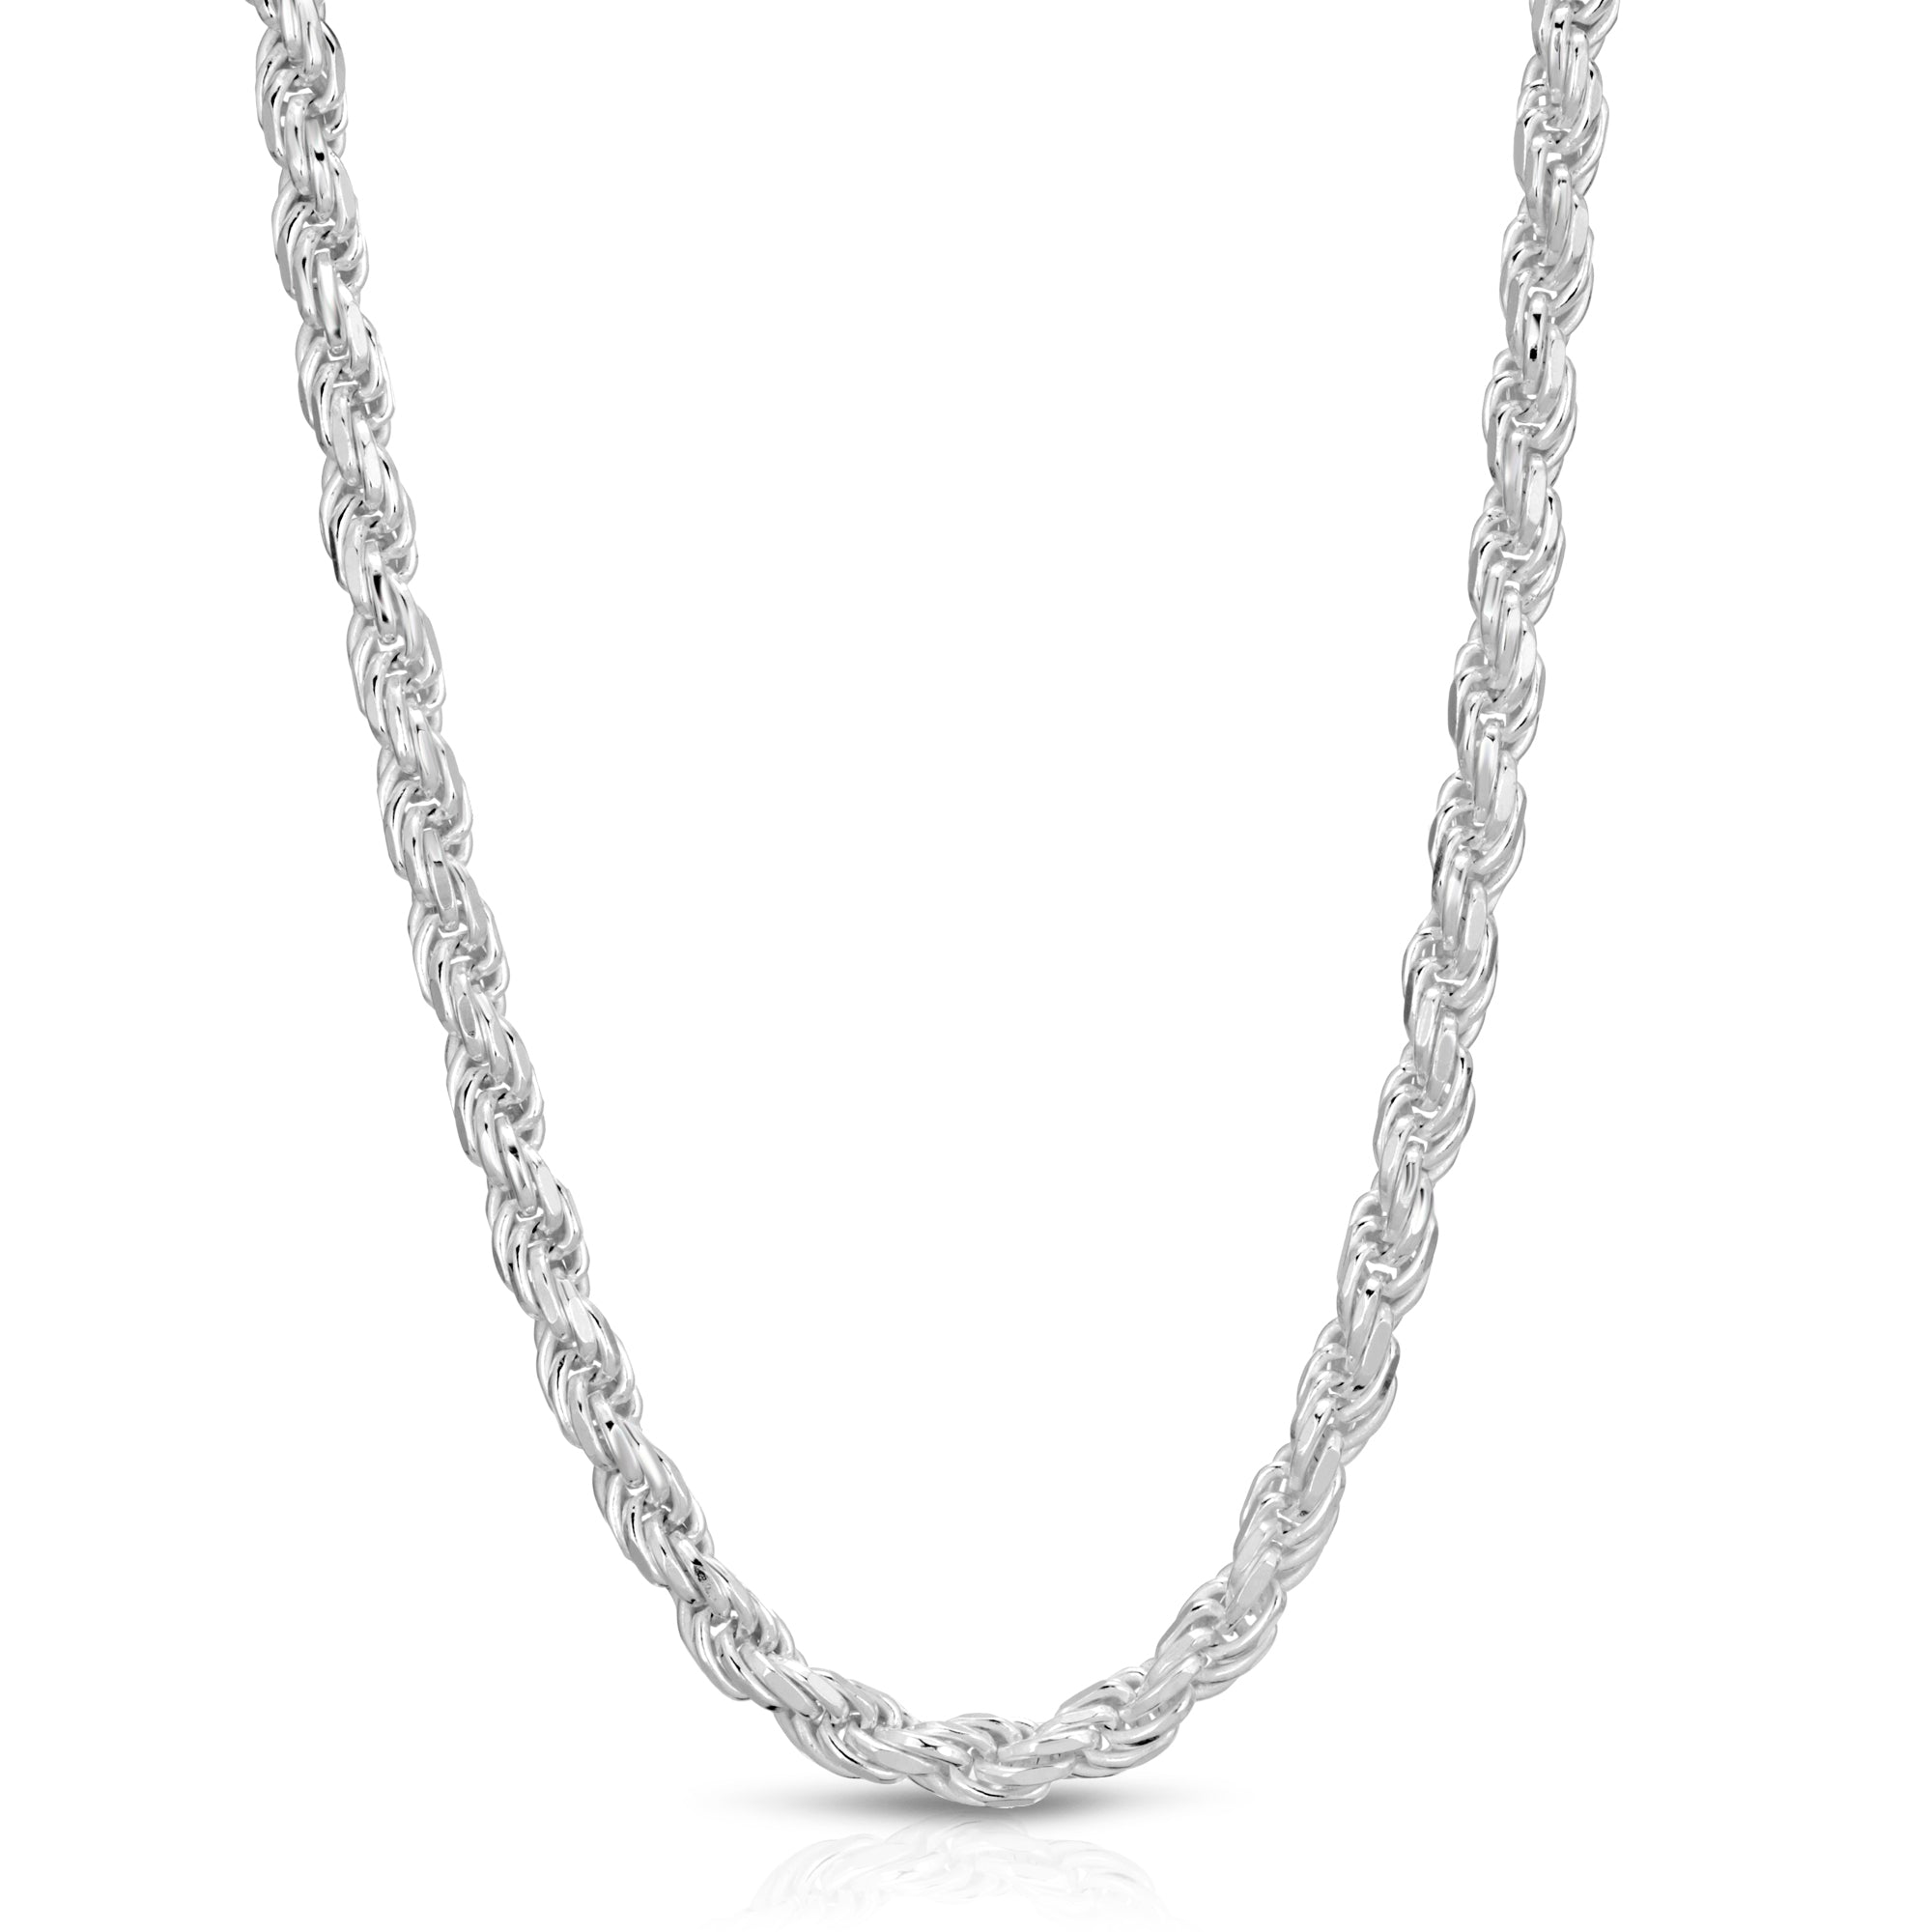 5.5mm Sterling Silver Rope Chain